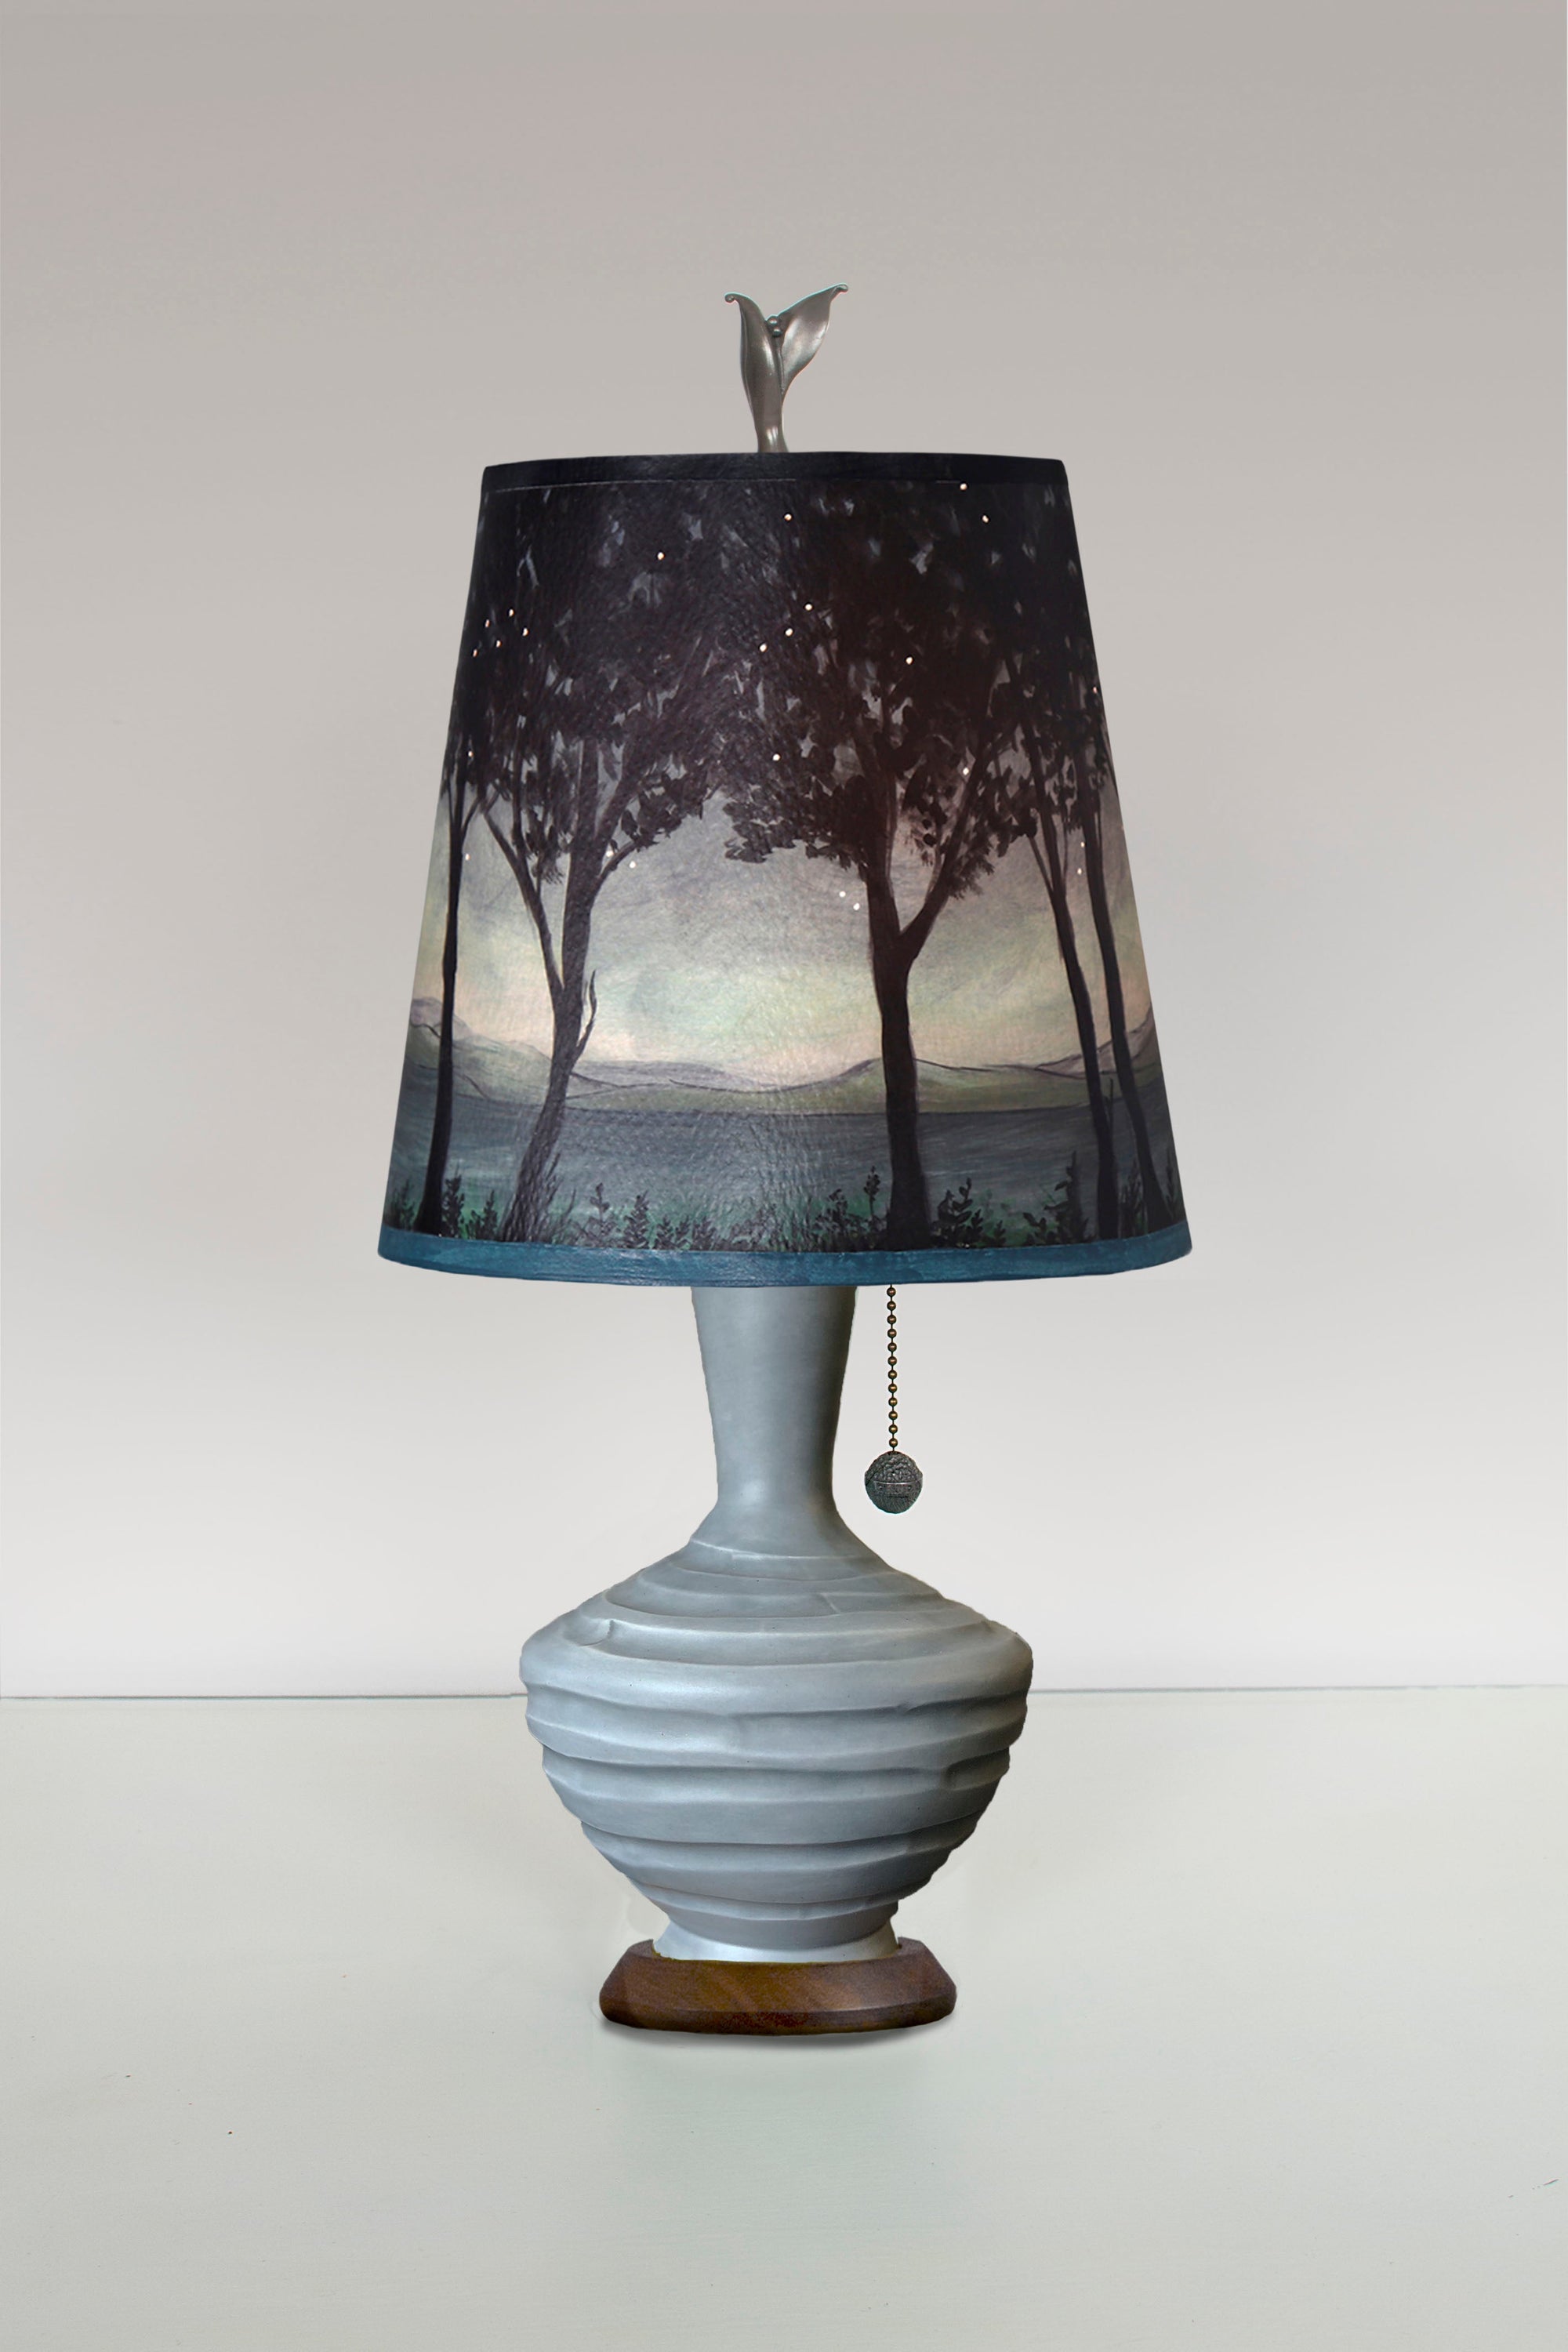 Janna Ugone & Co Table Lamps Ceramic Table Lamp with Small Drum Shade in Twilight